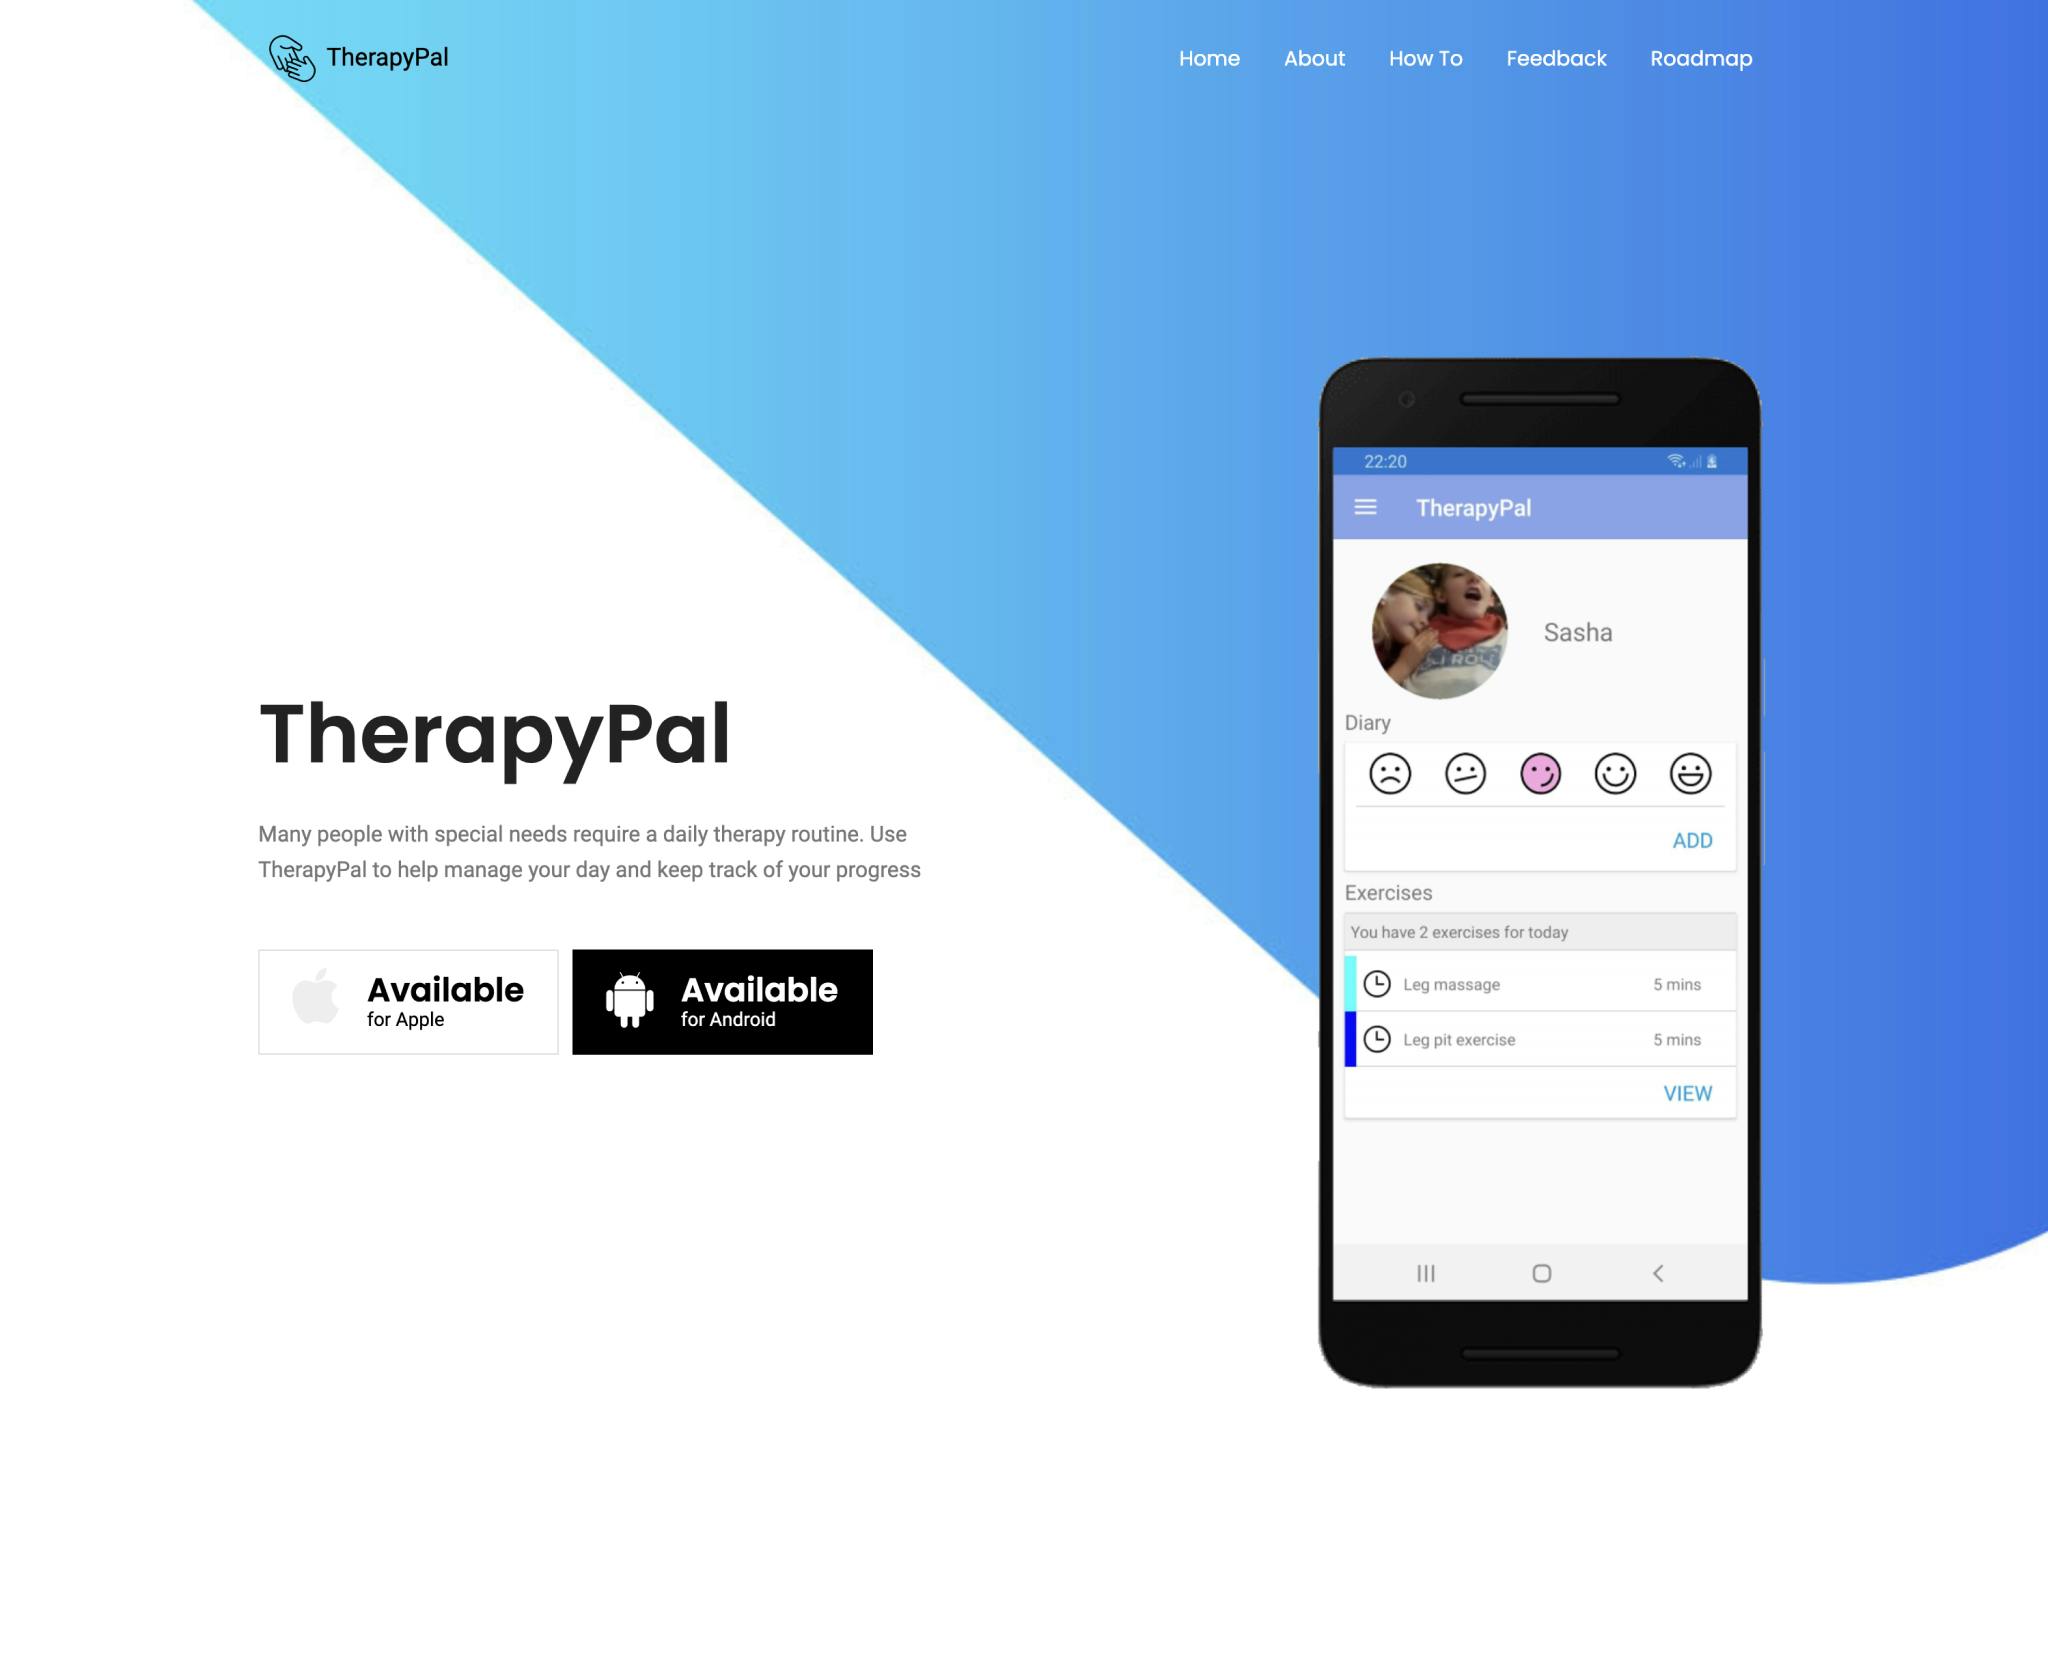 Joining TherapyPal